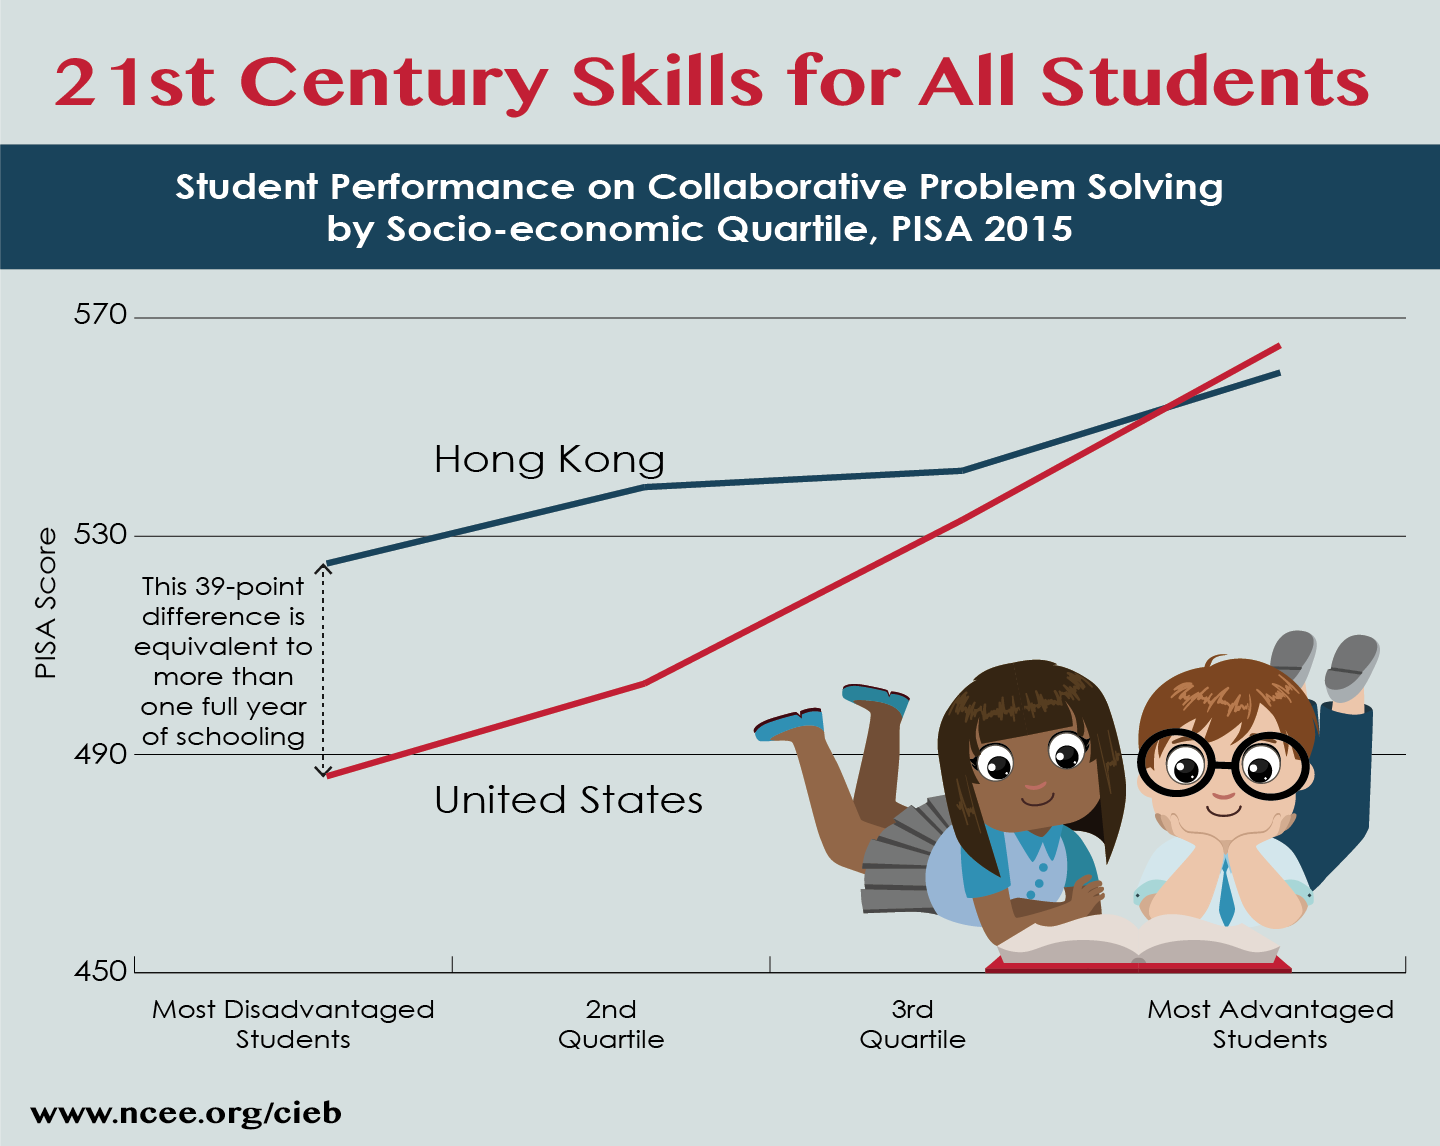 Disadvantaged Hong Kong students outperform disadvantaged US students by more than a year in 21st century skills